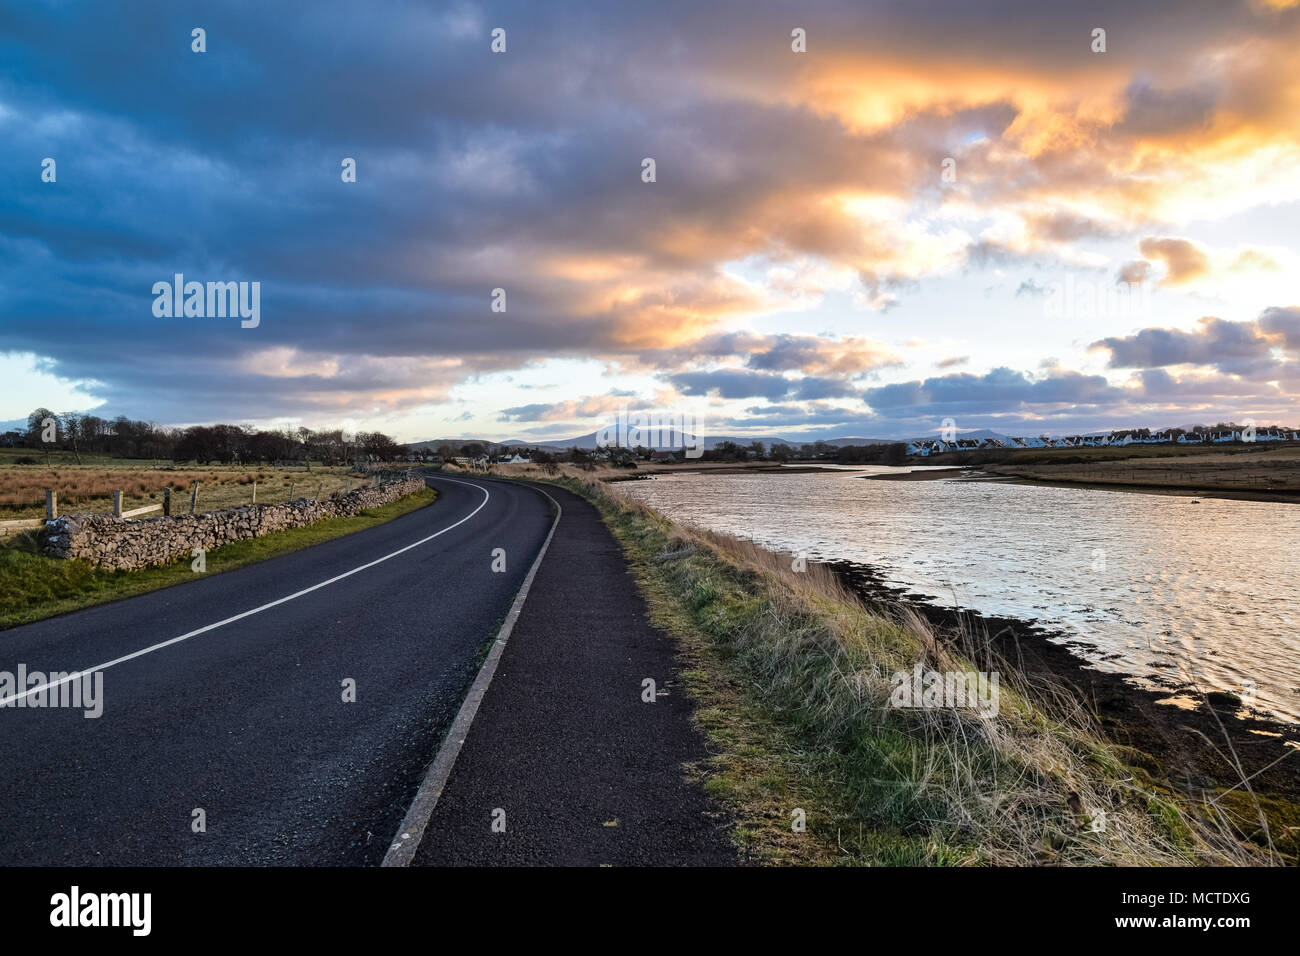 A curving road by a river at sunset Stock Photo